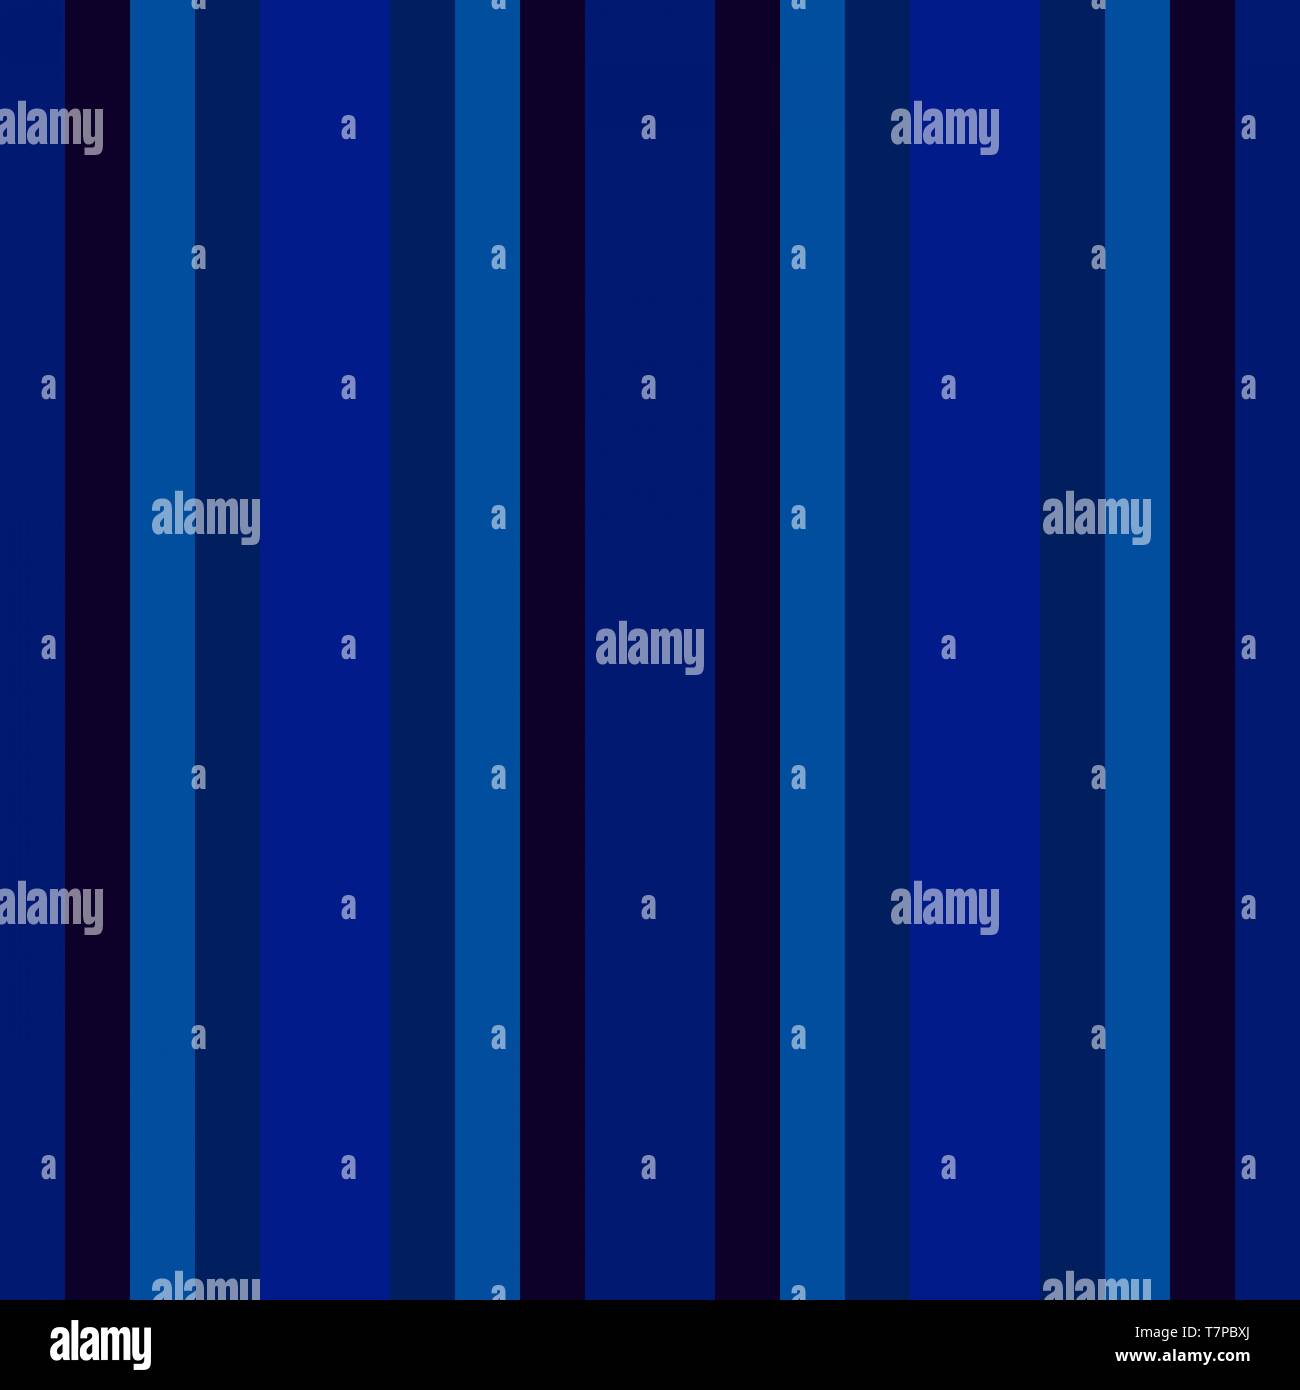 Vertical Lines Midnight Blue Strong Blue And Dark Blue Colors Abstract Background With Stripes For Wallpaper Presentation Fashion Design Or Web Si Stock Photo Alamy